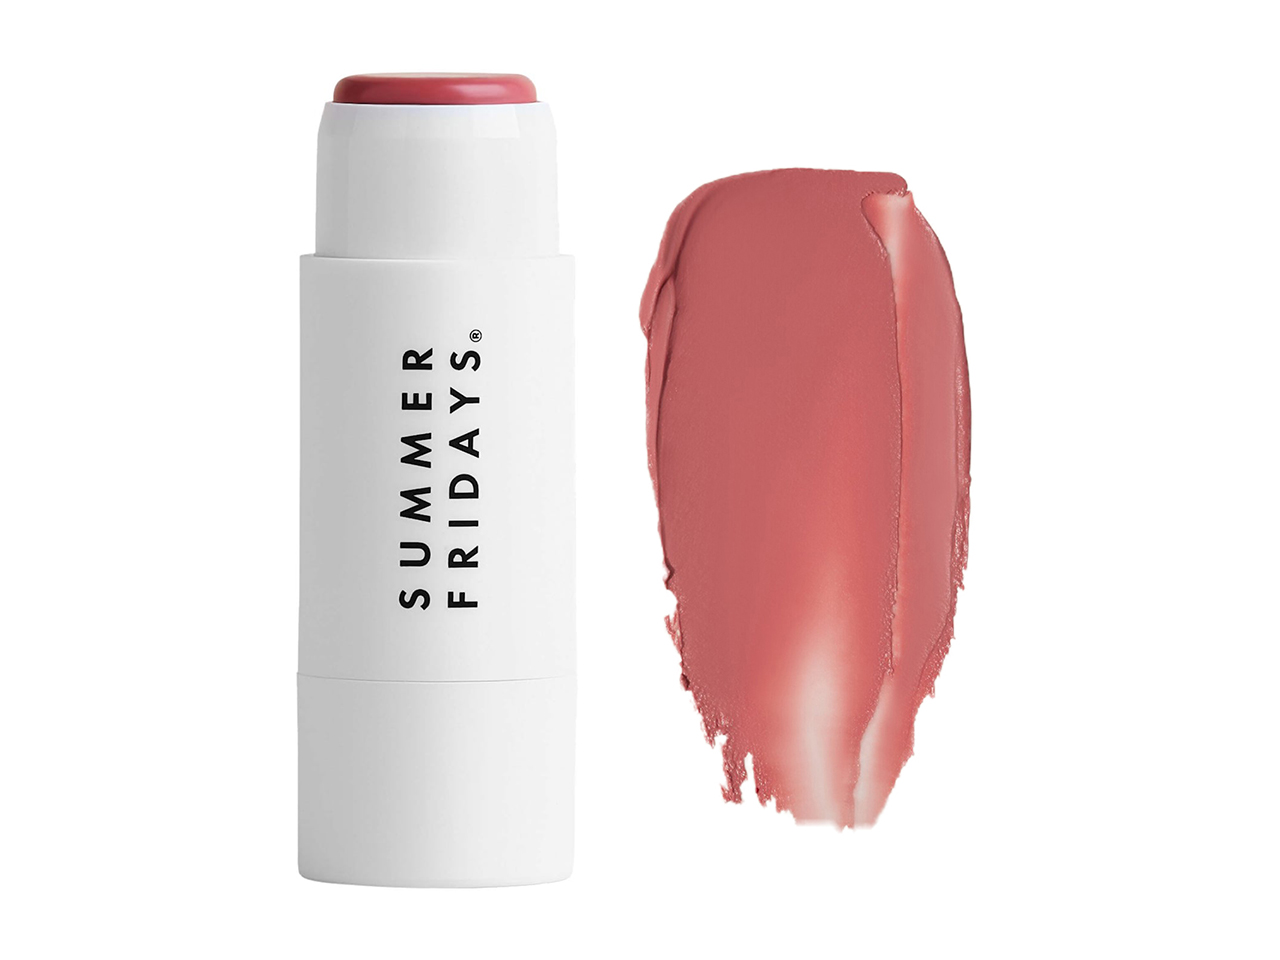 A tube of best beauty product for July 2023 Summer Fridays Blush Balm Lip + Cheek Stick in Dusty Rose.